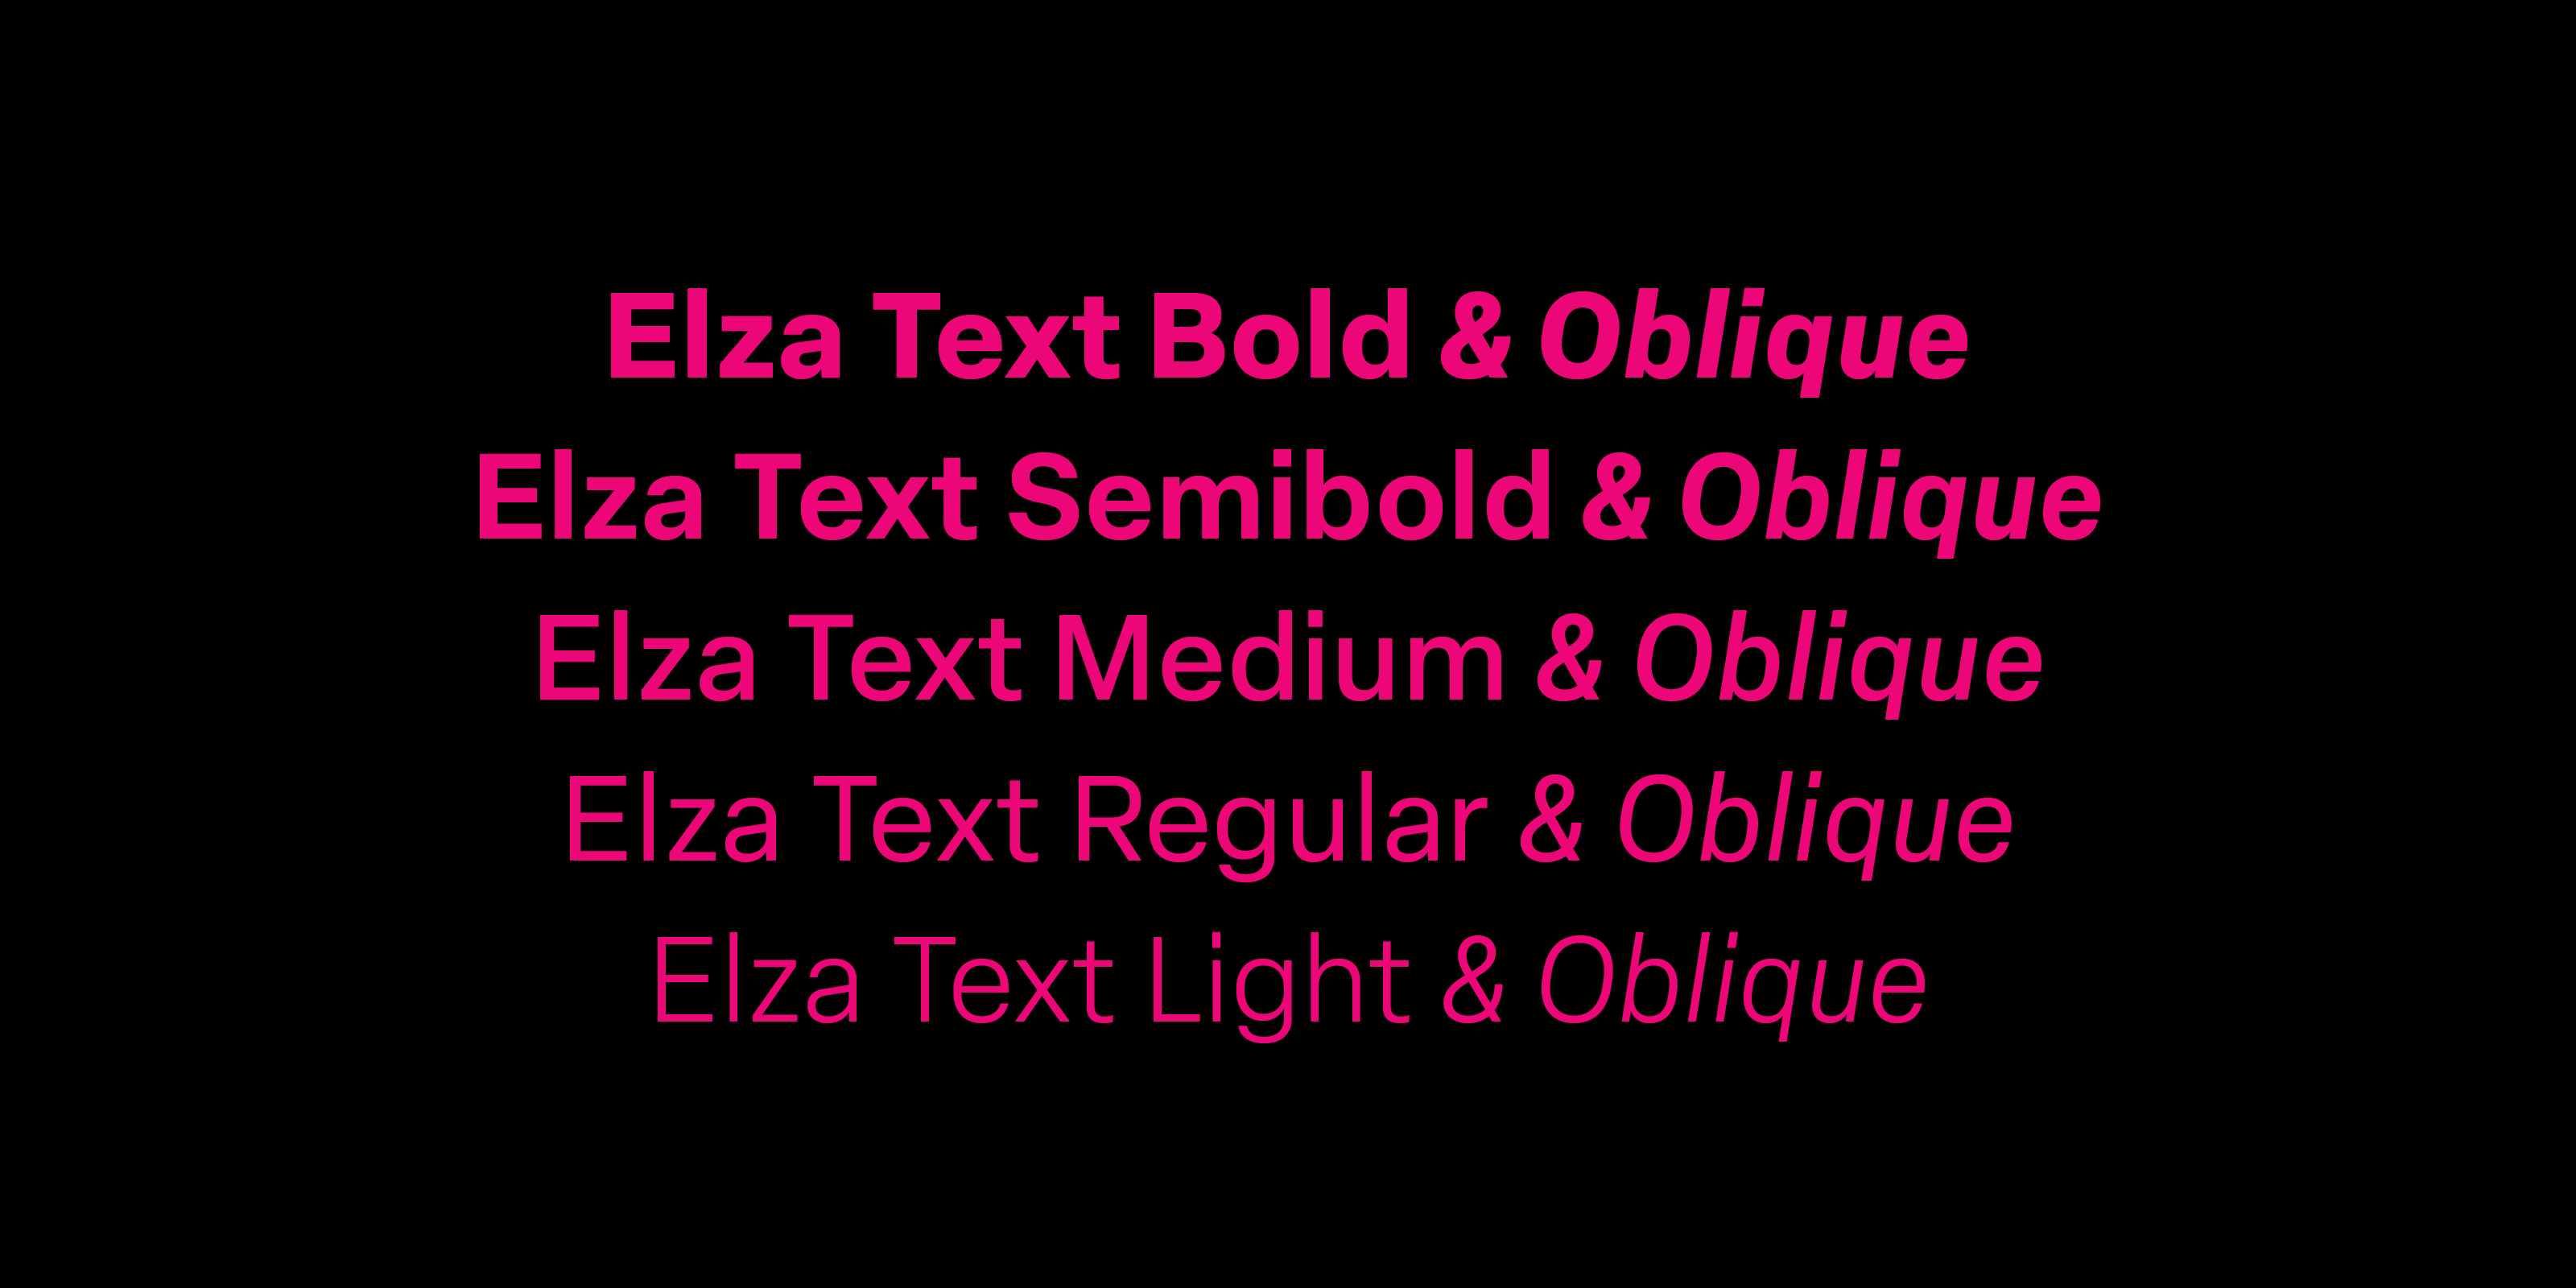 Card displaying Elza Text typeface in various styles